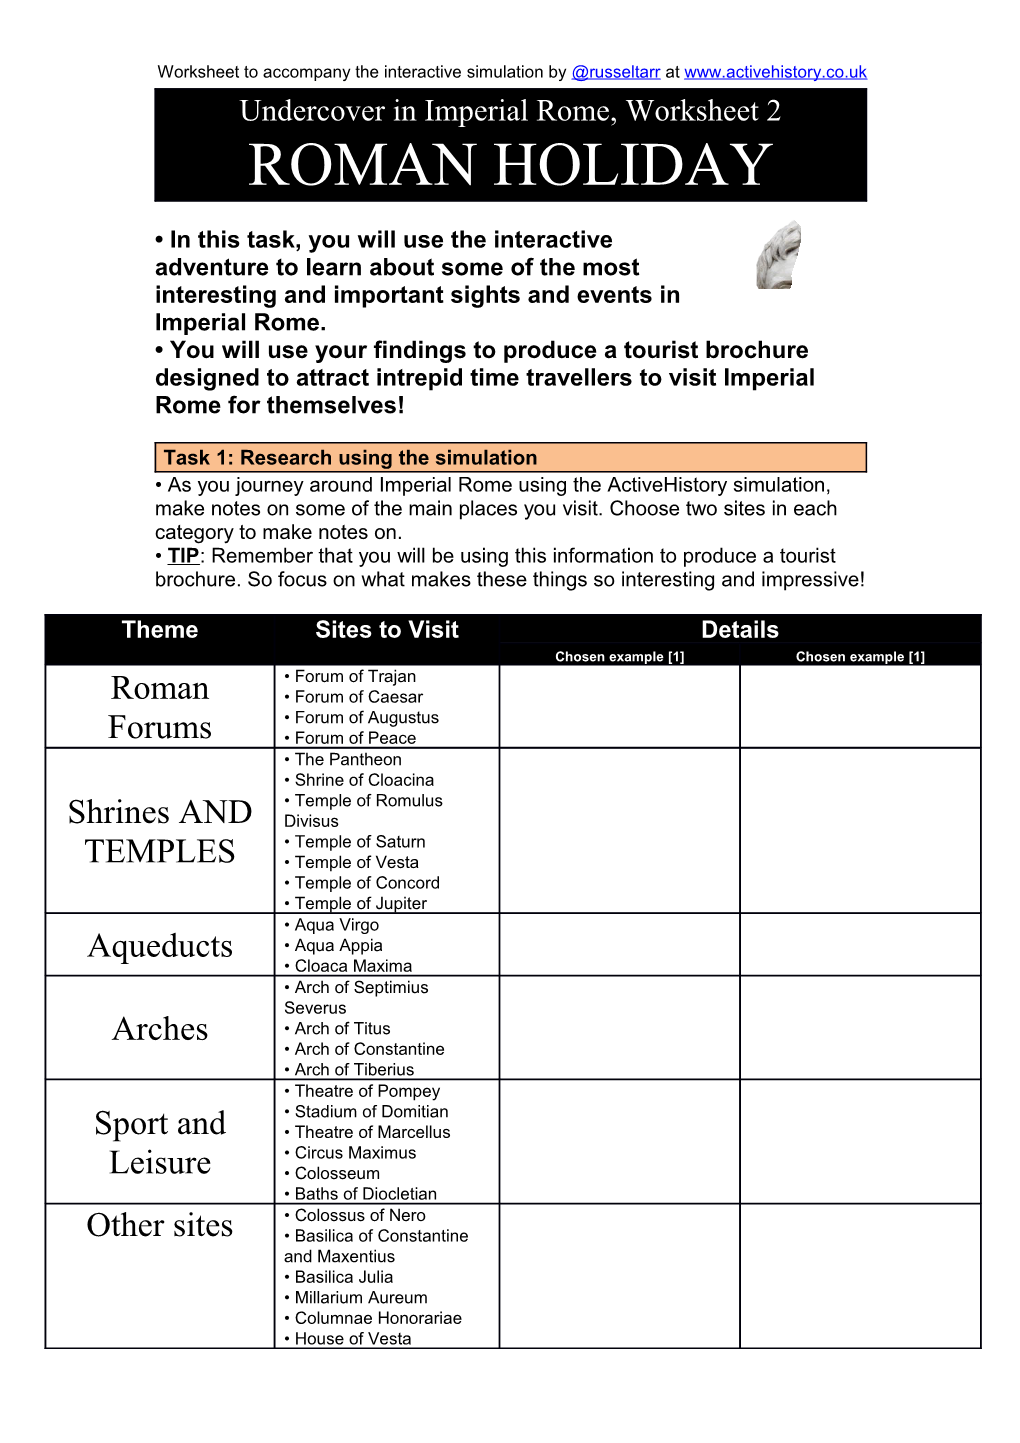 Worksheet to Accompany the Interactive Simulation by Russeltarr At